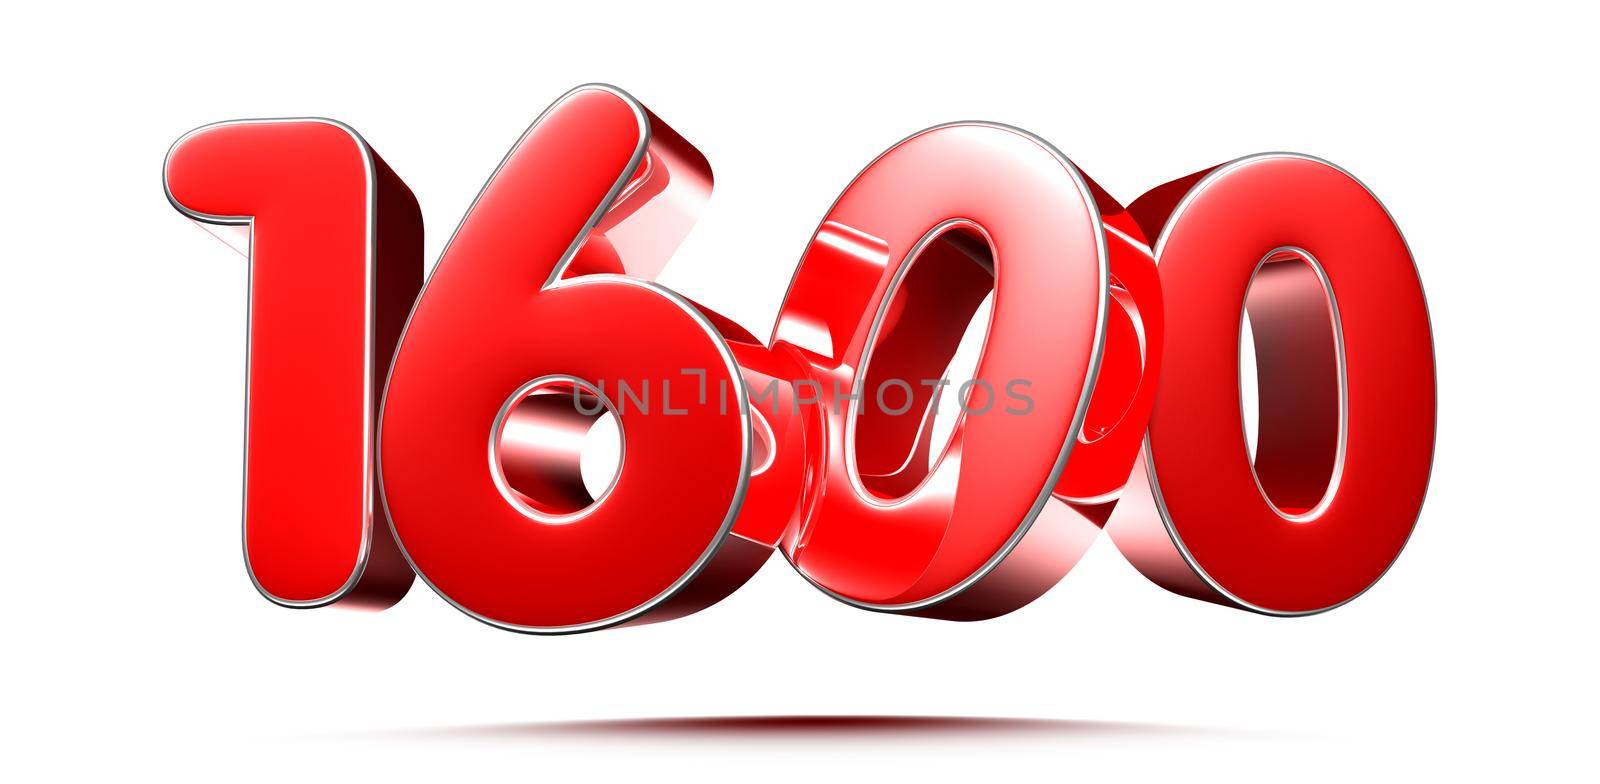 Rounded red numbers 1600 on white background 3D illustration with clipping path